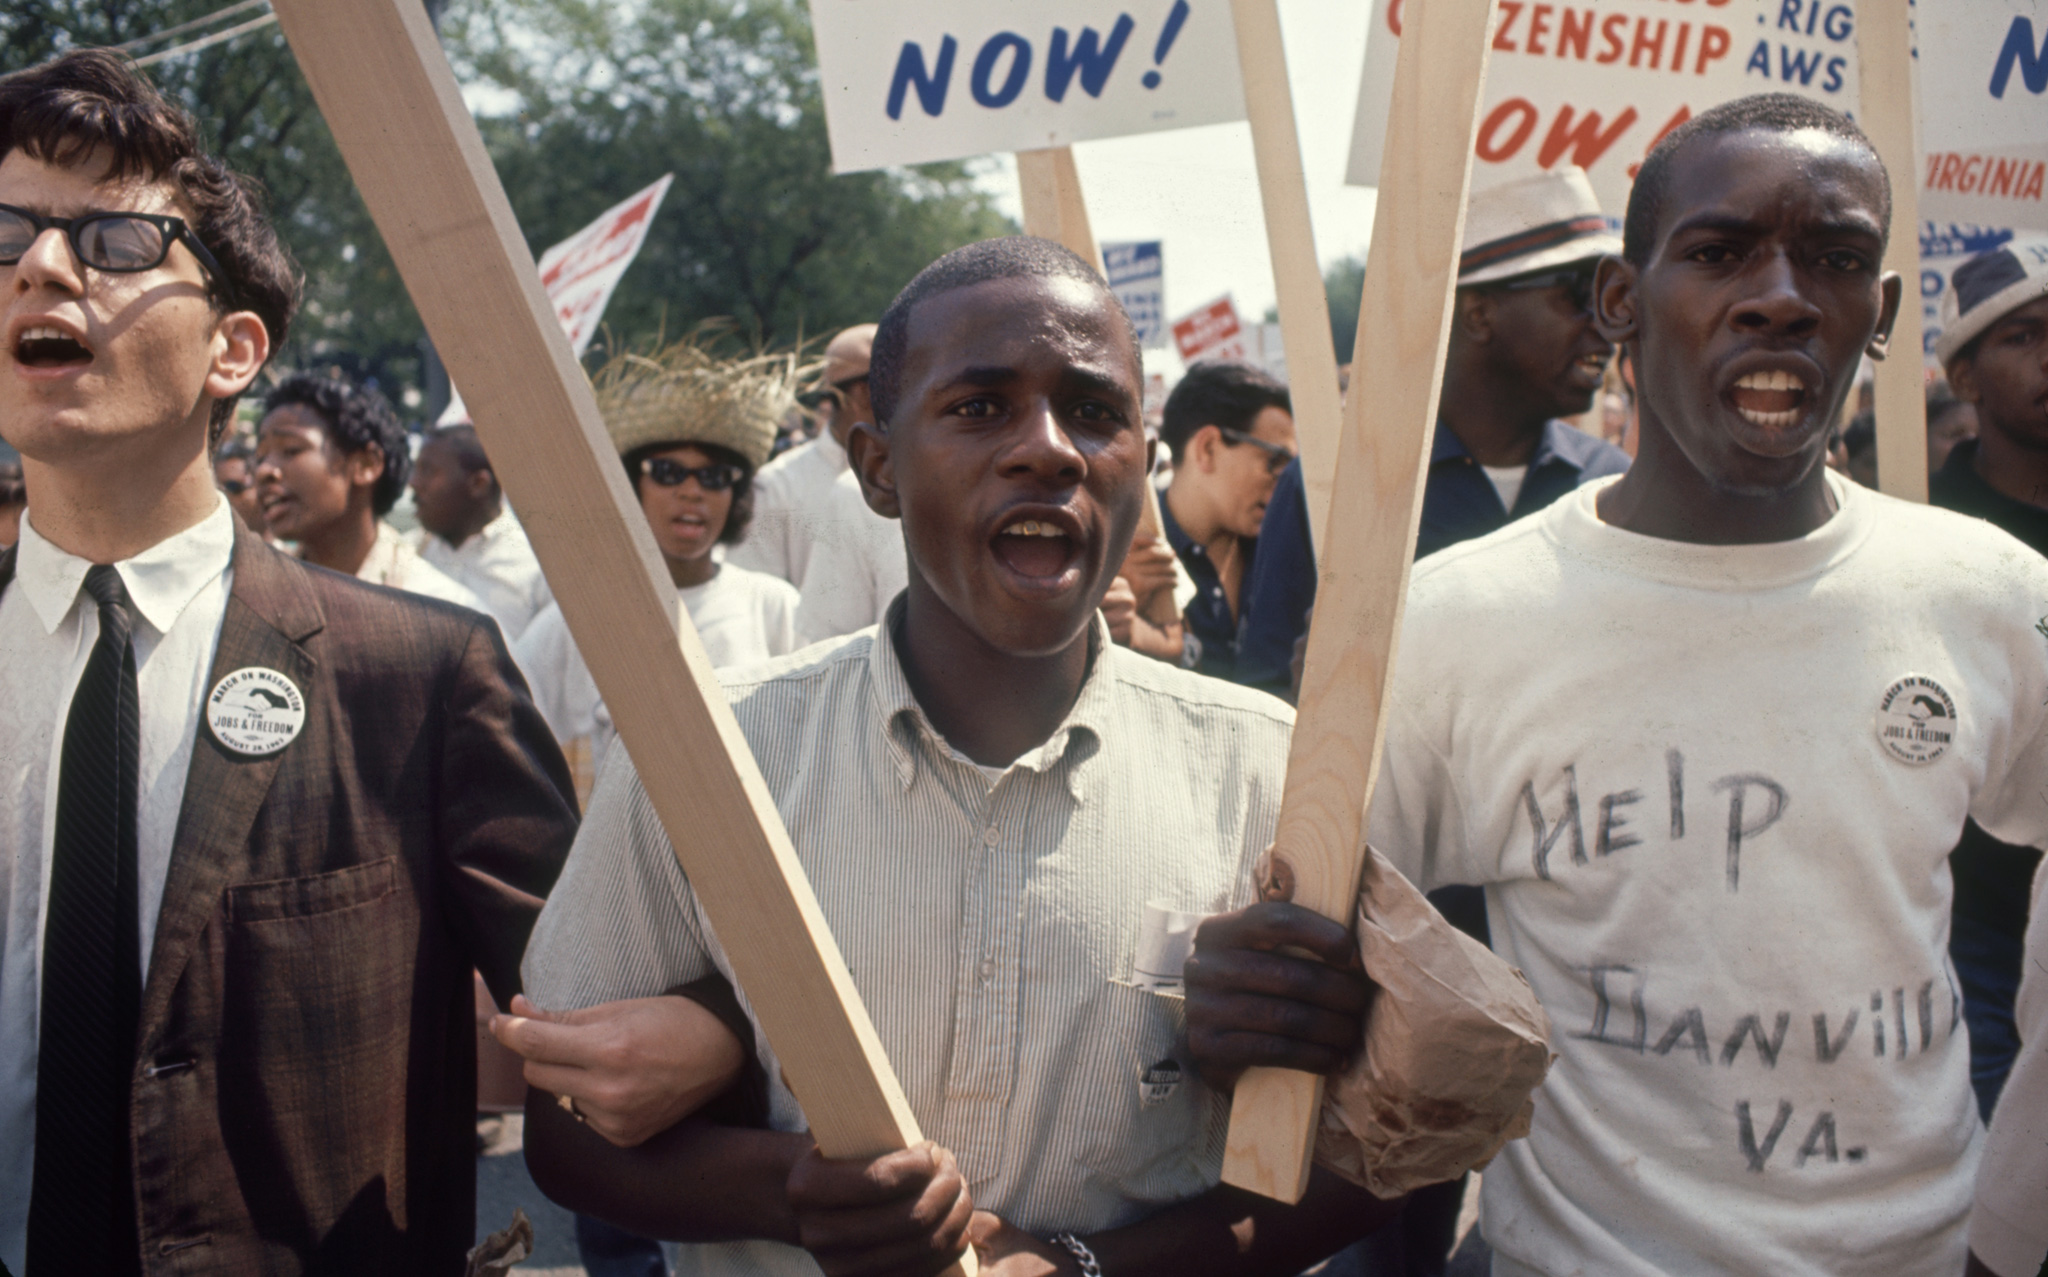 Civil rights activists march at the Prayer Pilgrimage for Freedom, May 1957 at the Lincoln Memorial, Washington, D.C.